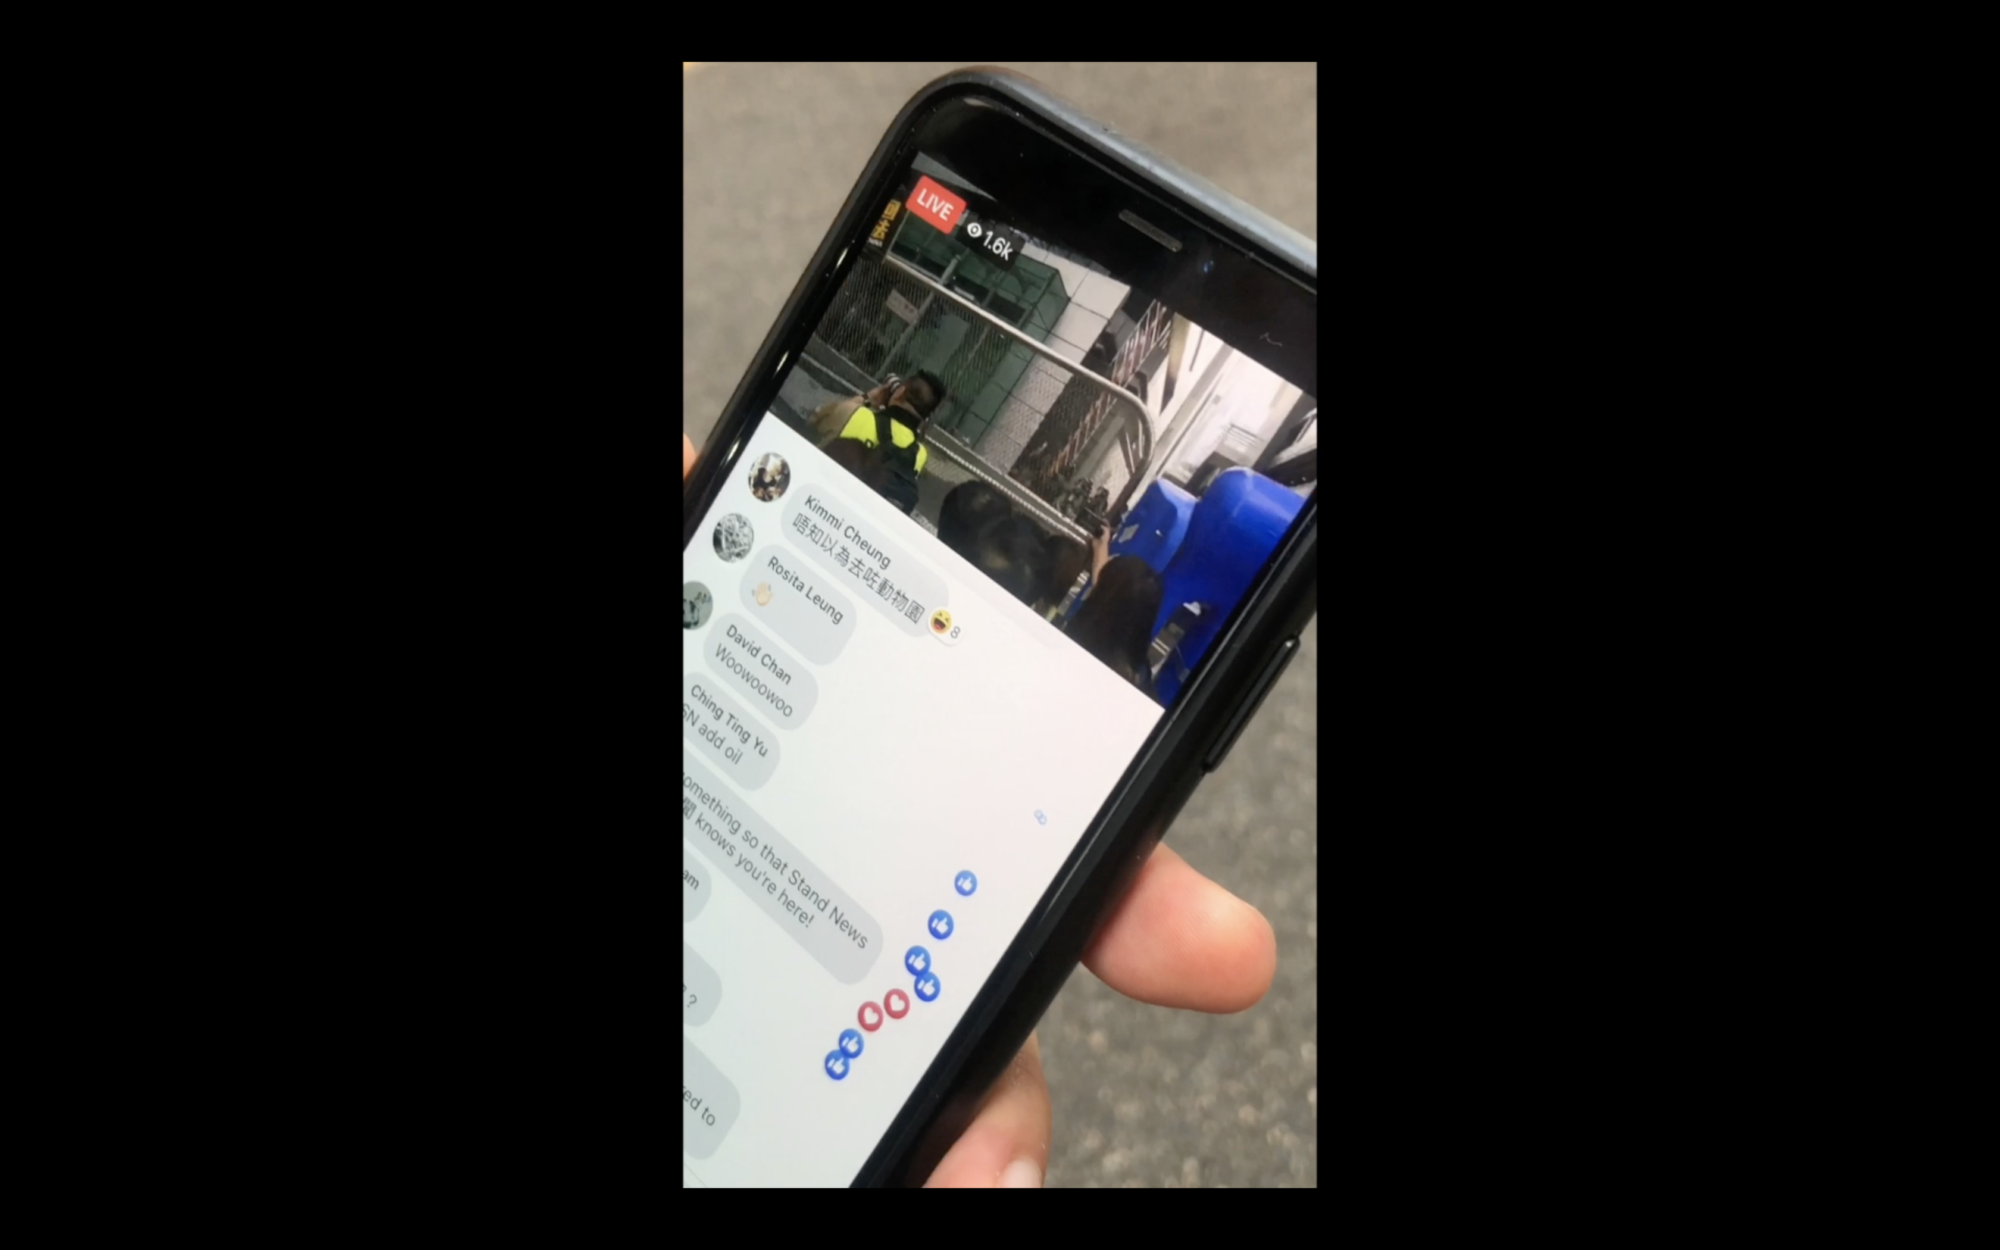 A close up image of a phone showing a Facebook livestream of what appears to be a protest in the street, with 1.6 thousand viewers and many comments which cover what's happening on livestream.